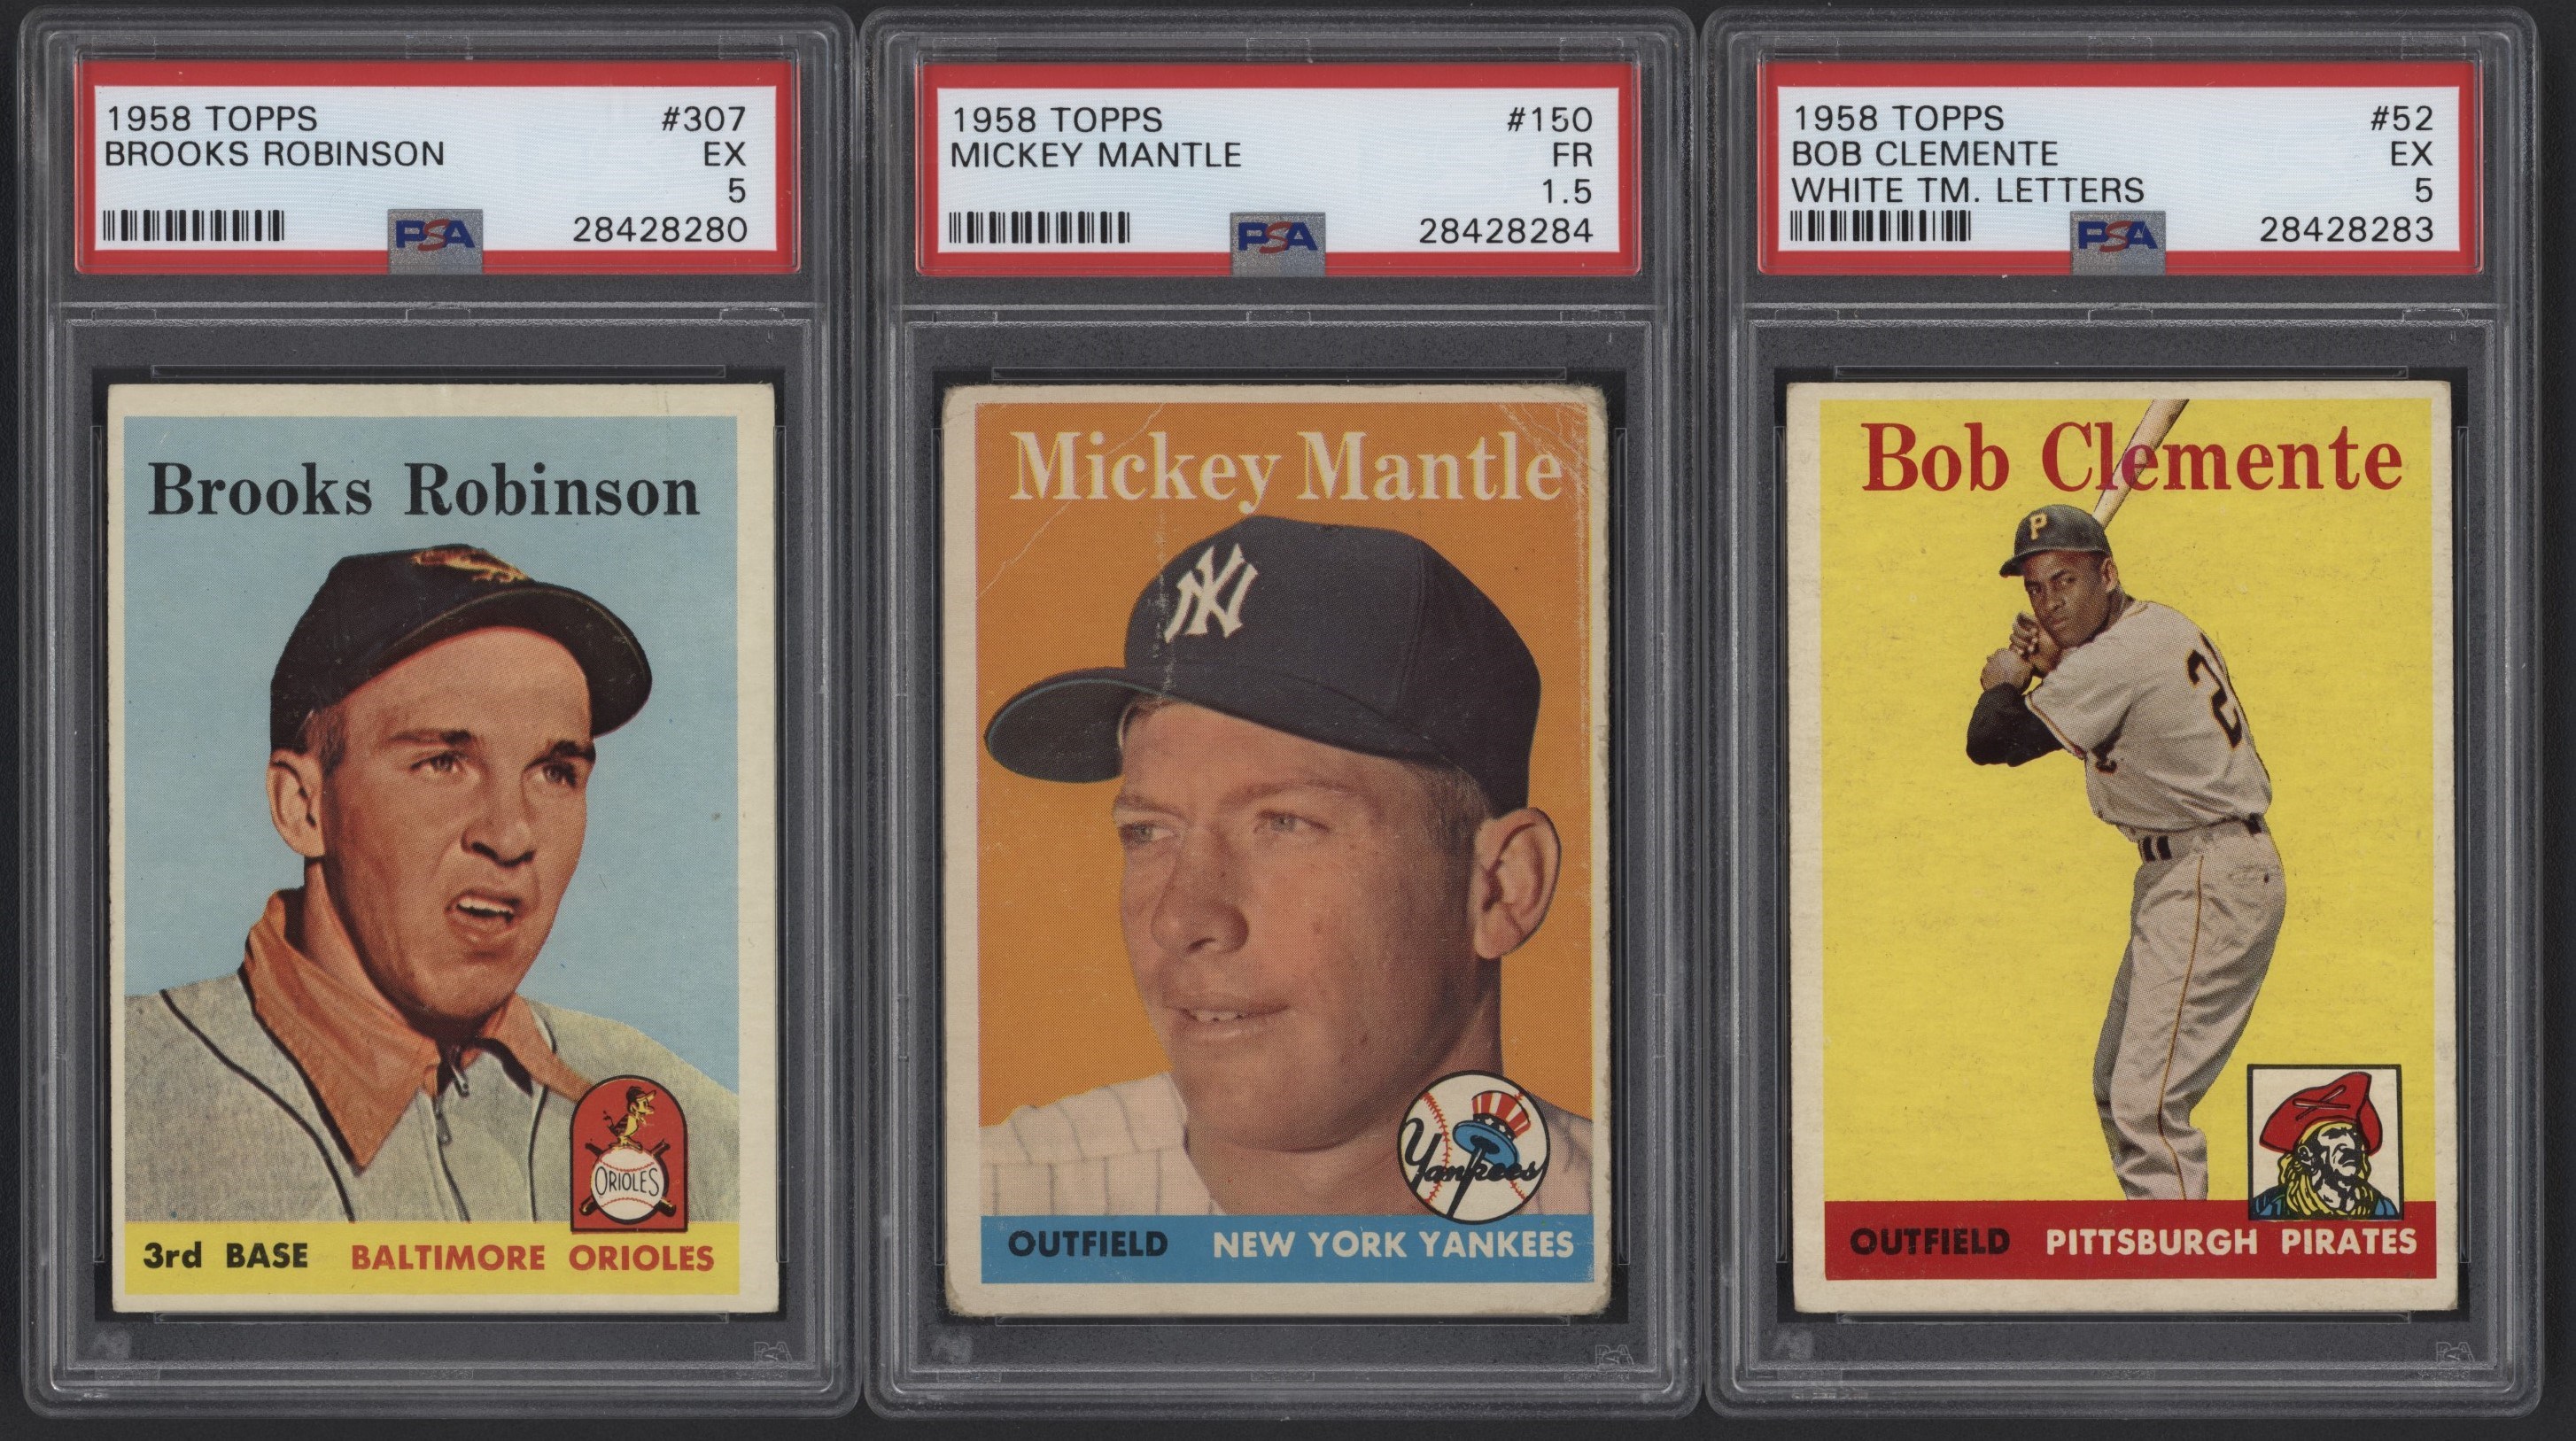 Baseball and Trading Cards - 1958 Topps "Hall Of Fame" PSA Card Including Mantle PSA (6)